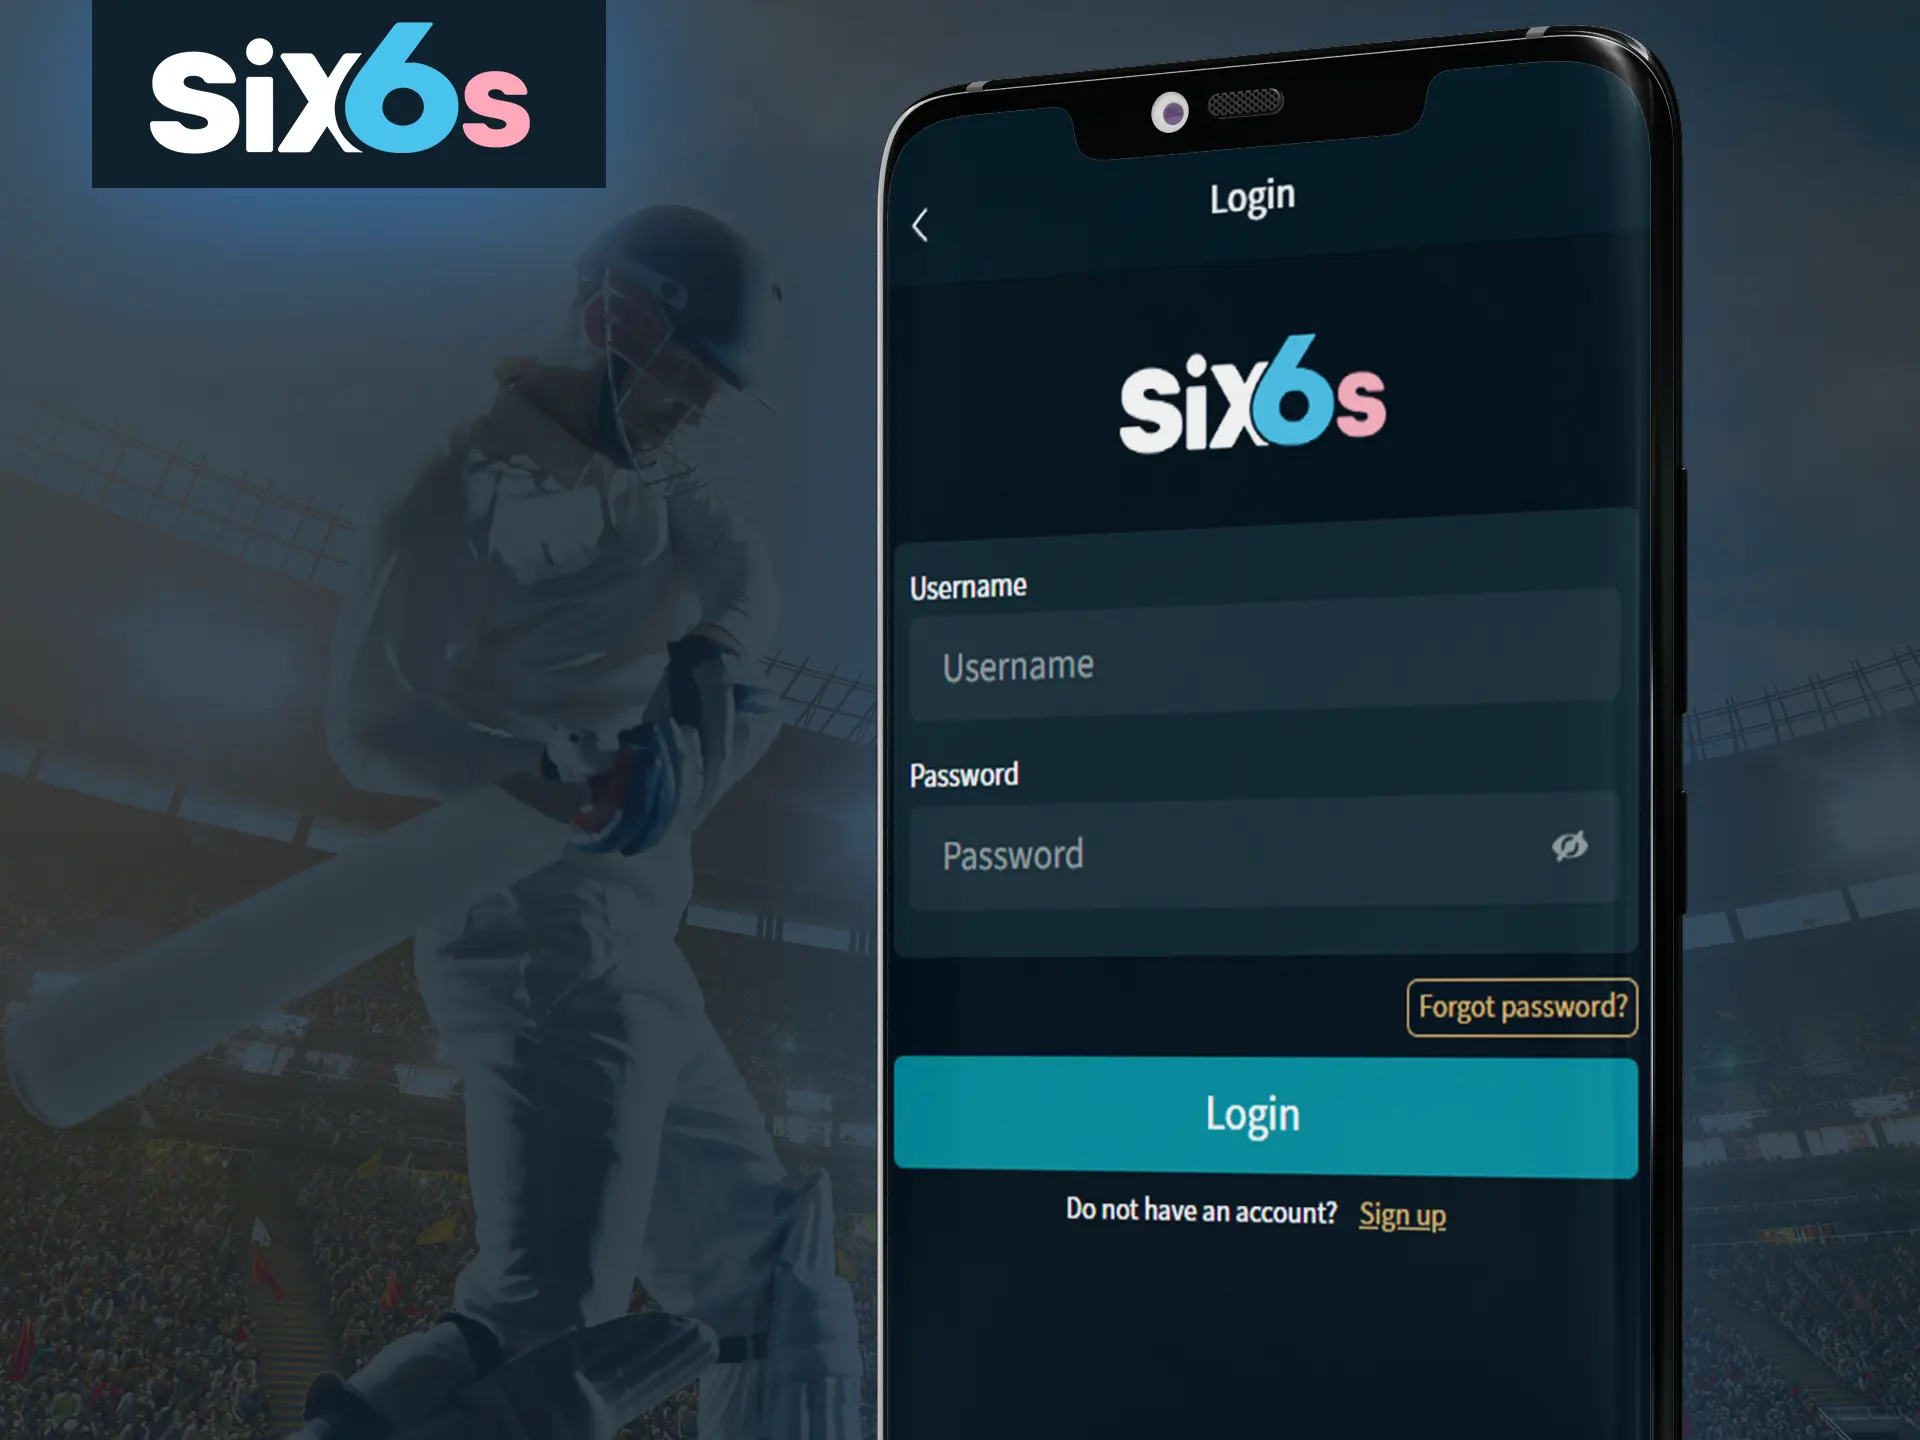 Log in to your account on the Six6s app.